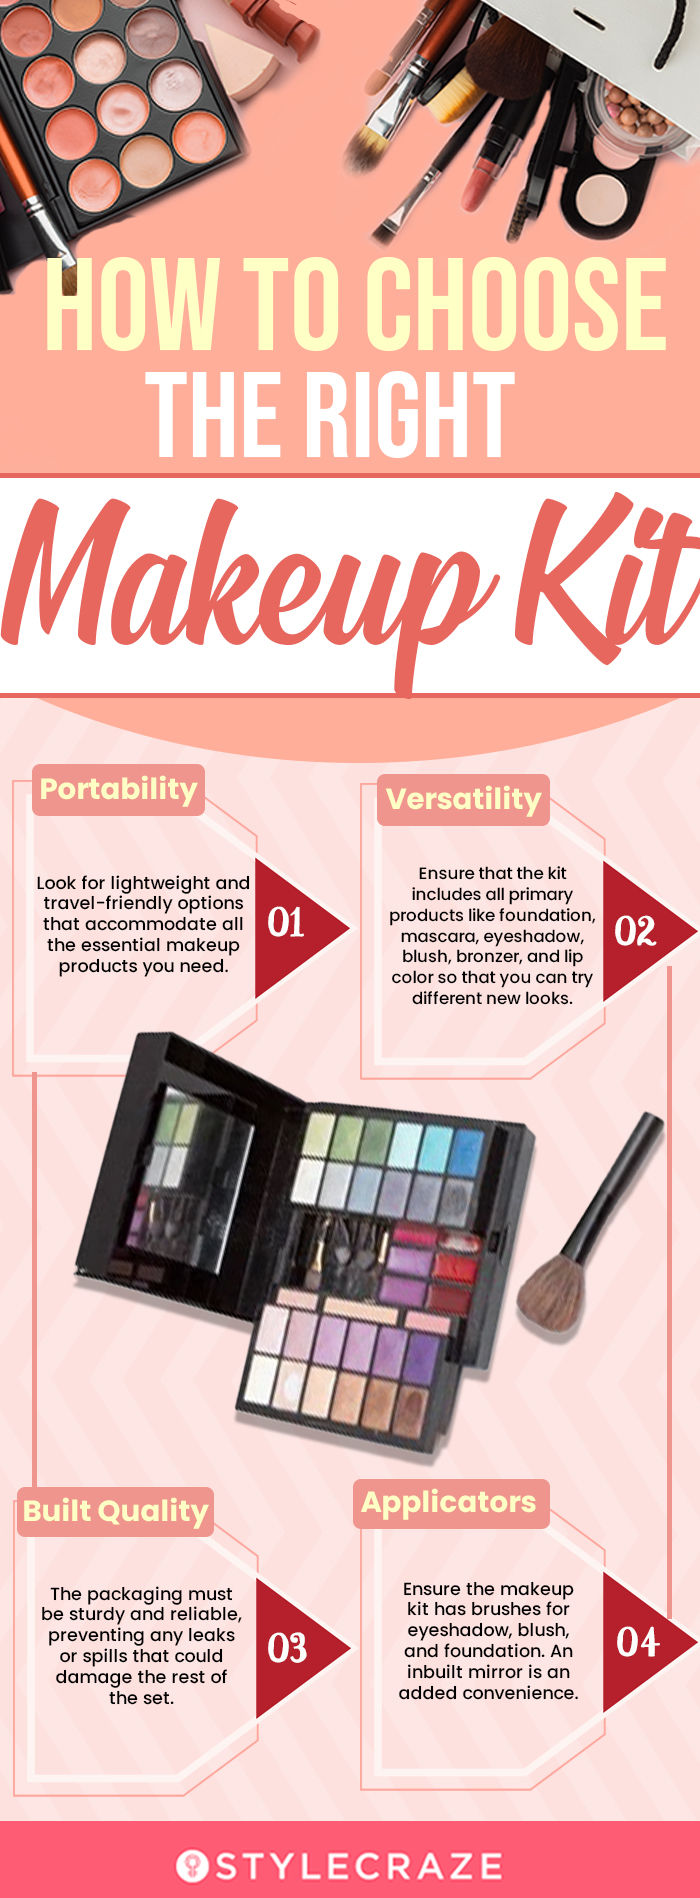 How To Choose The Right Makeup Kit (infographic)